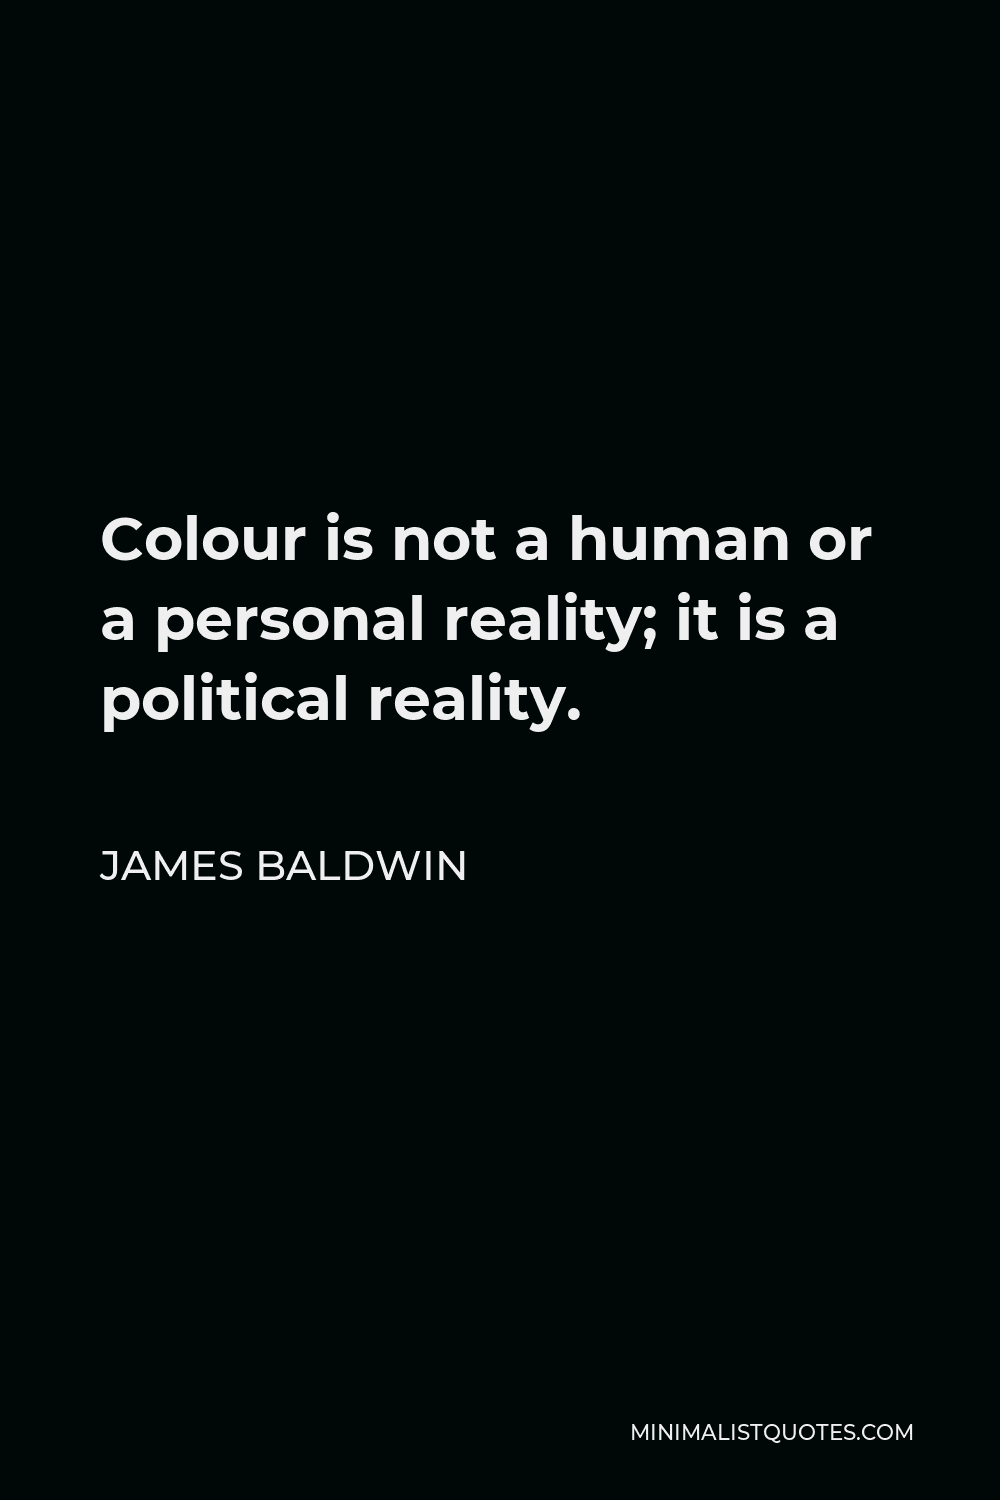 James Baldwin Quote - Colour is not a human or a personal reality; it is a political reality.